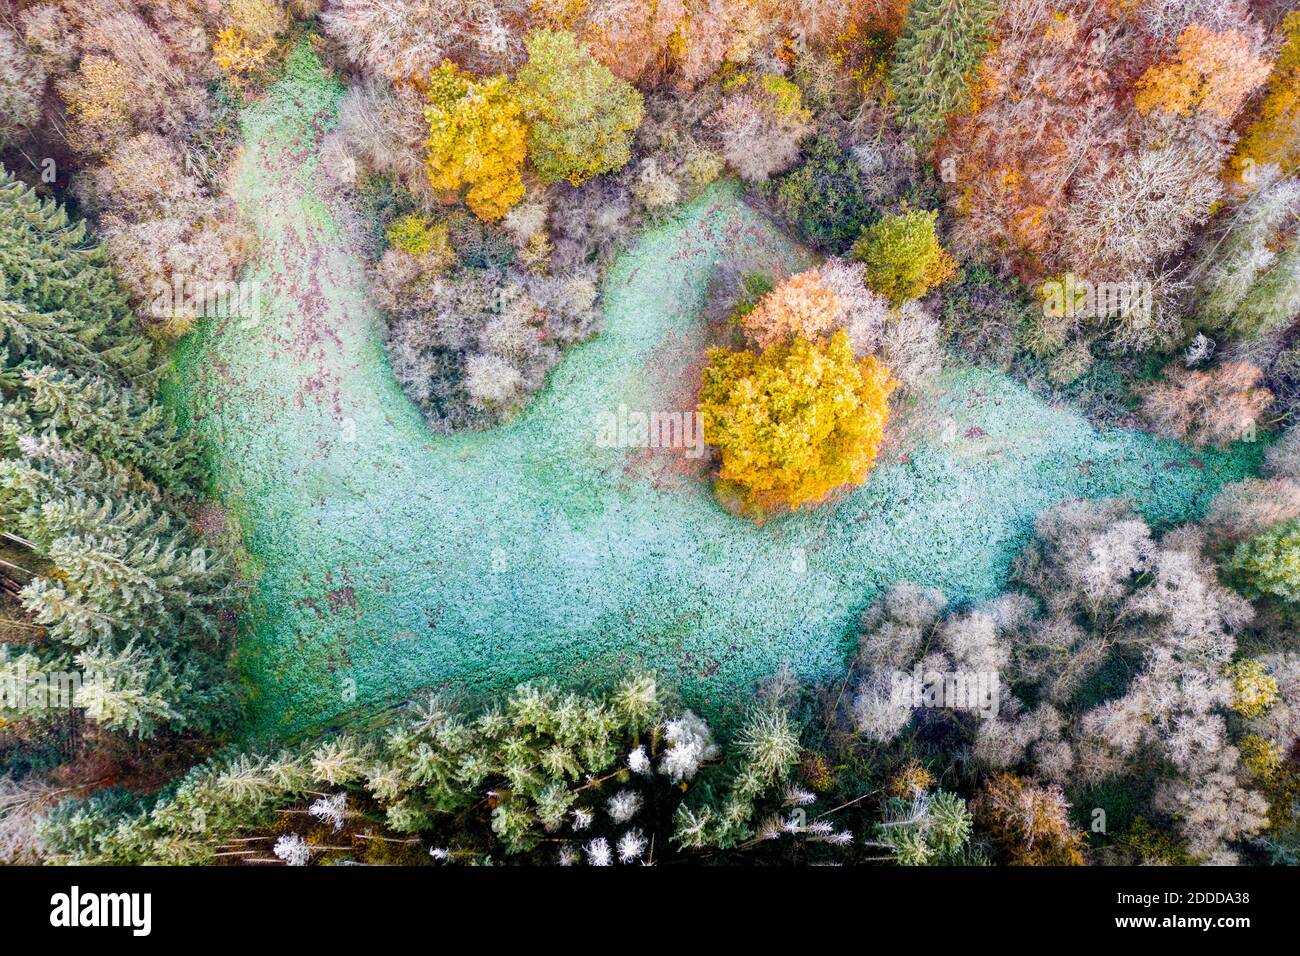 Drone view of turquoise patch of grass in autumn forest at dawn Stock Photo